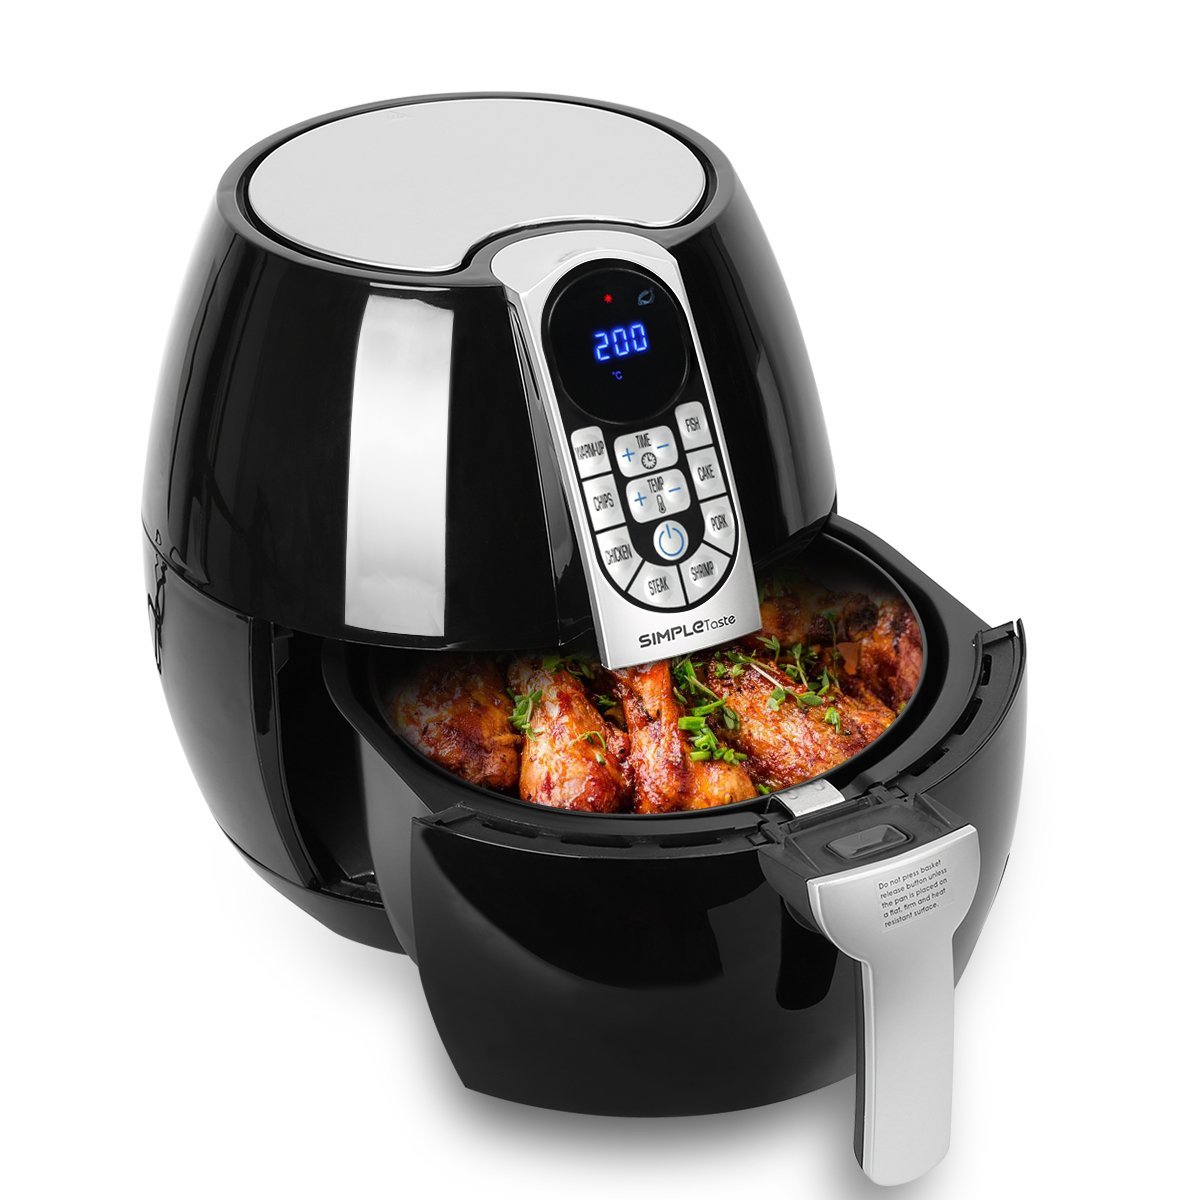 SimpleTaste Healthy Air Fryer, 1500 Watt, 3.5 Litre, Rapid Air Circulation Technology, Smart Programs with Automatic and Manual Timer & Temperature Controls